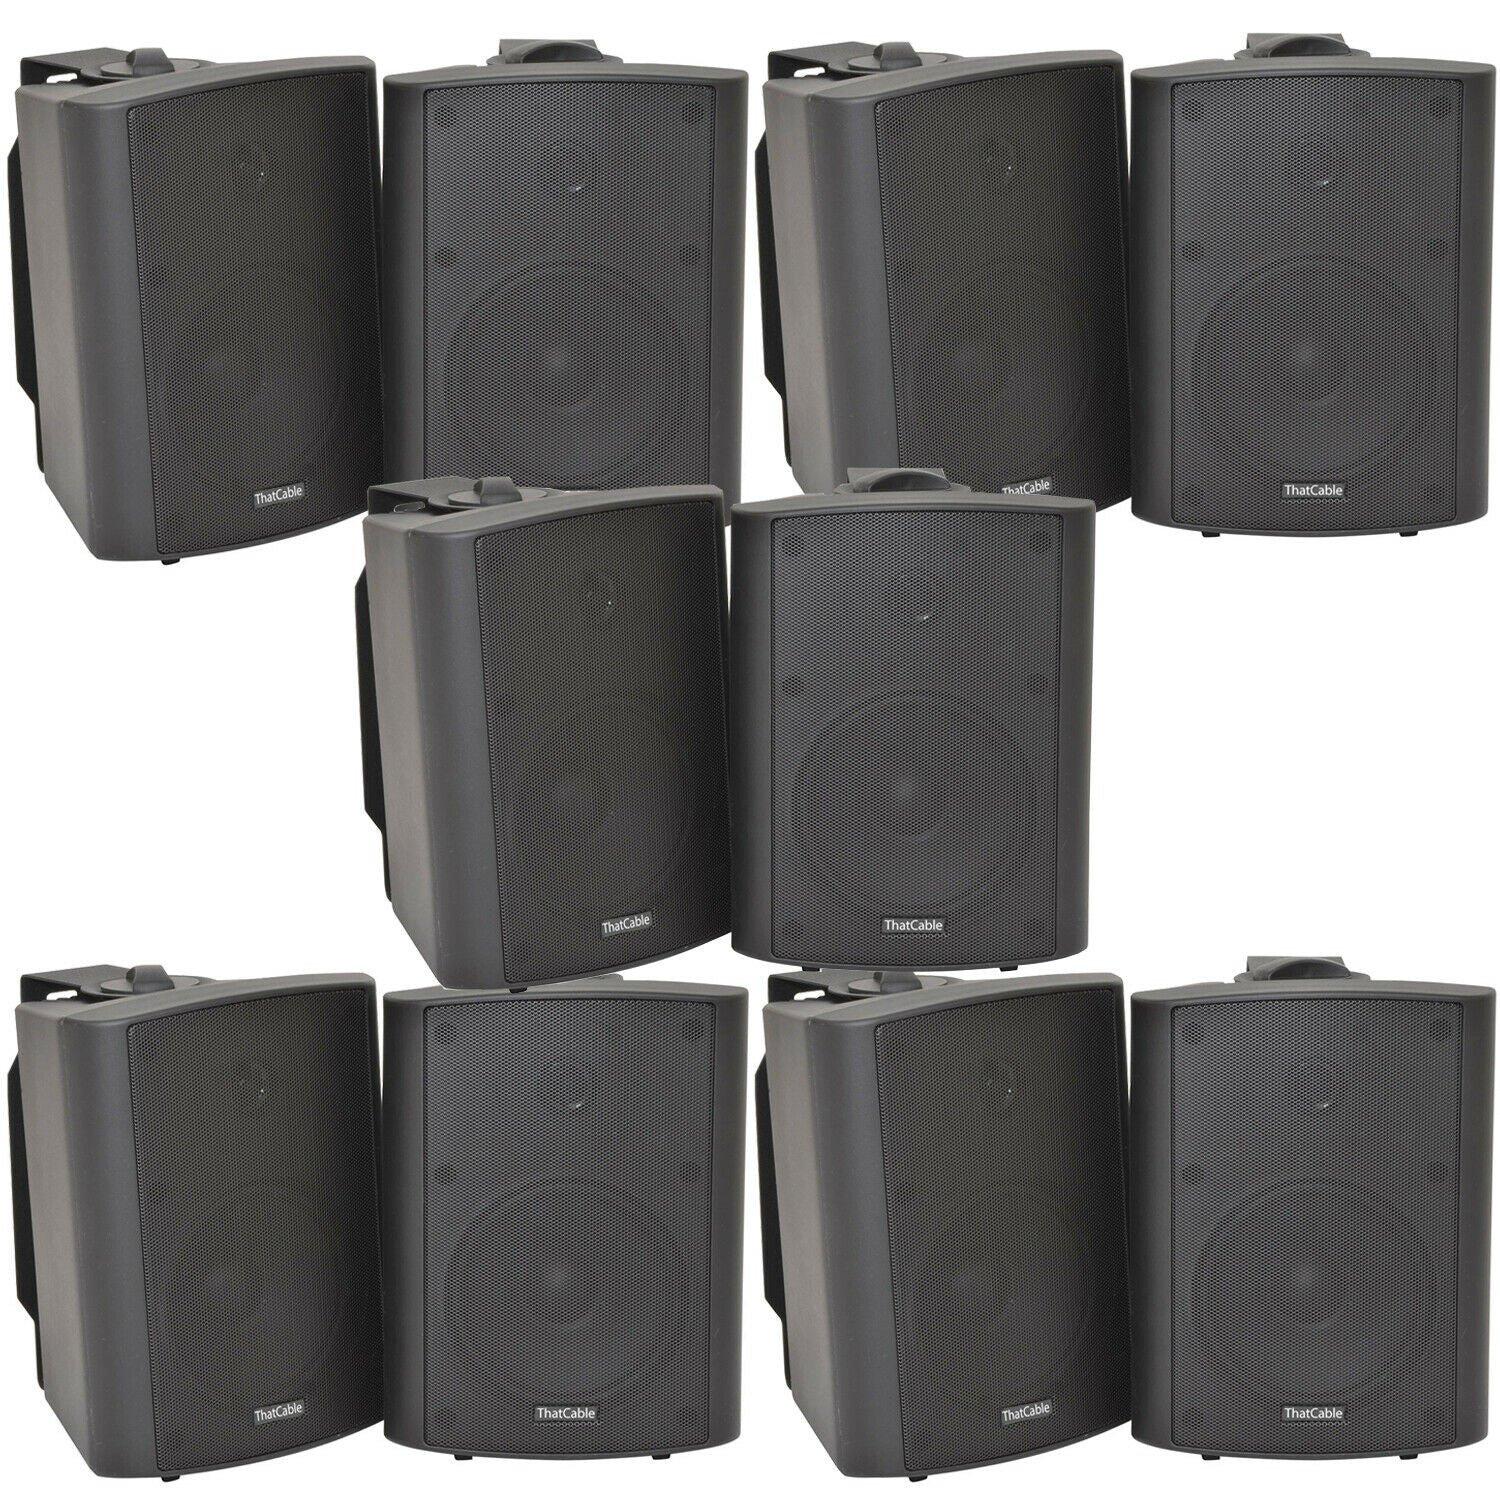 10x 90W Black Wall Mounted Stereo Speakers 5.25